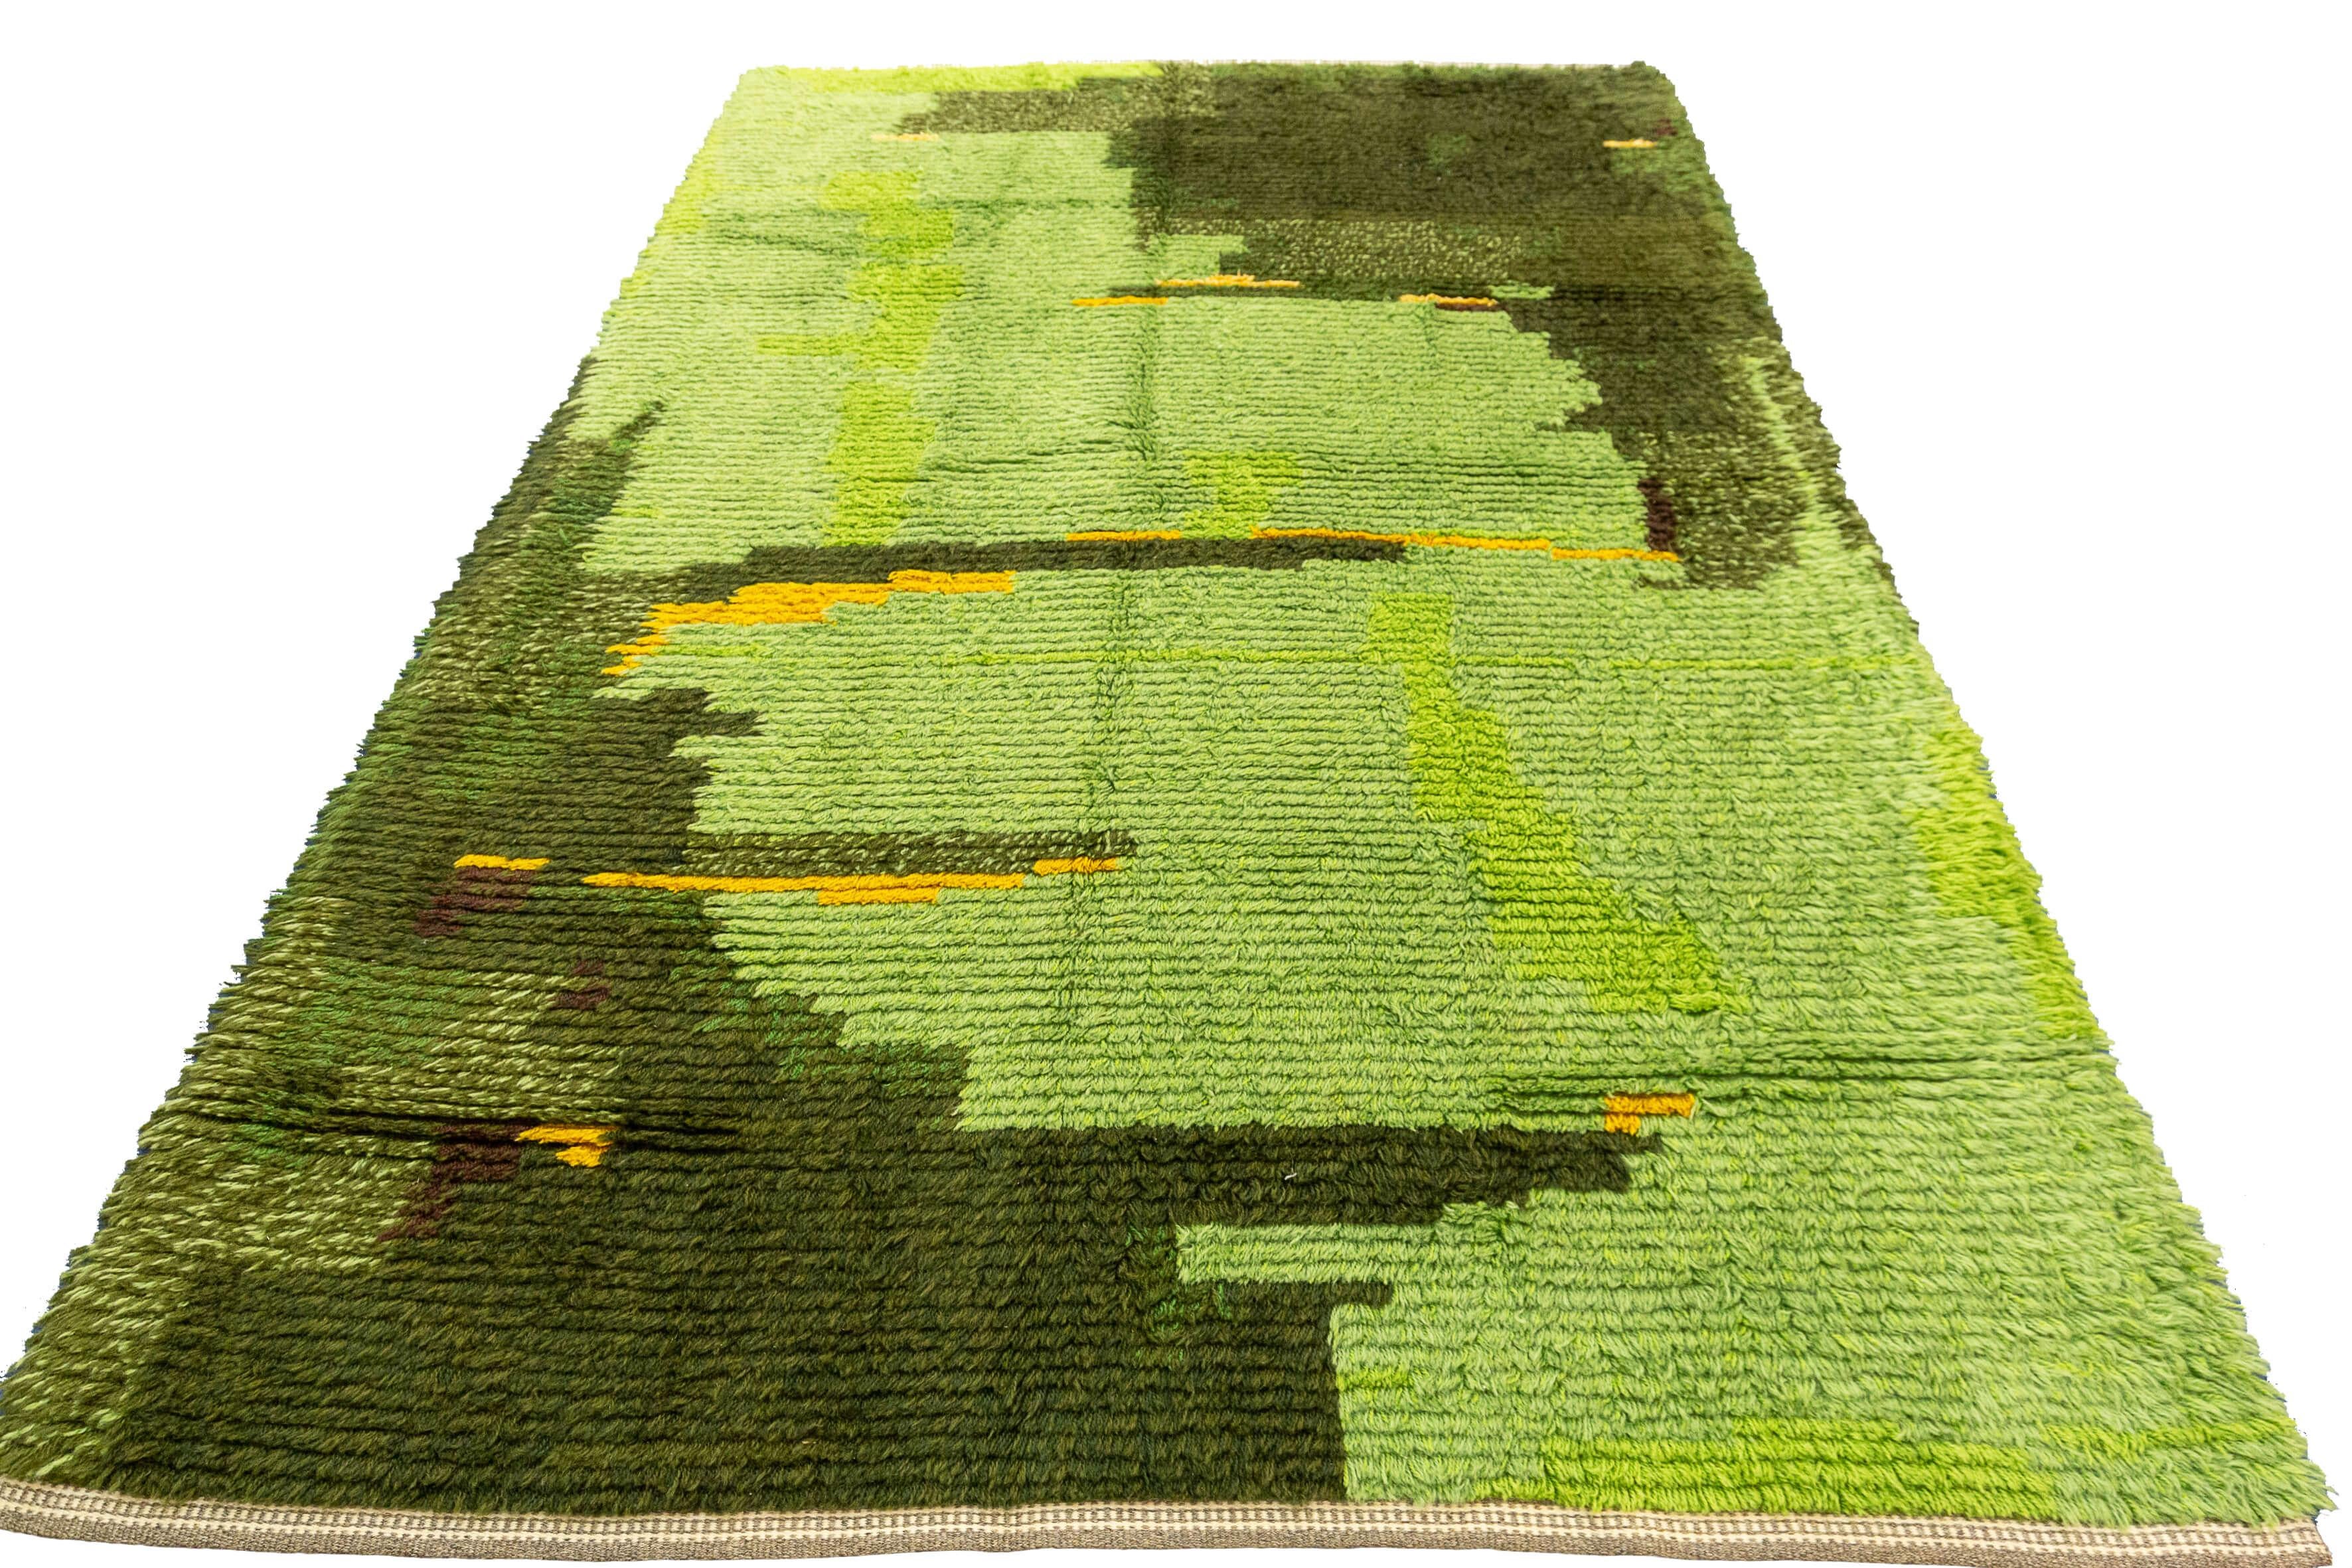 This Rya Swedish rug is adorned with a beautiful green color that exudes freshness, tranquility, and a connection to nature. The lush green hue adds a vibrant and rejuvenating touch to any space it graces, infusing it with a sense of serenity and